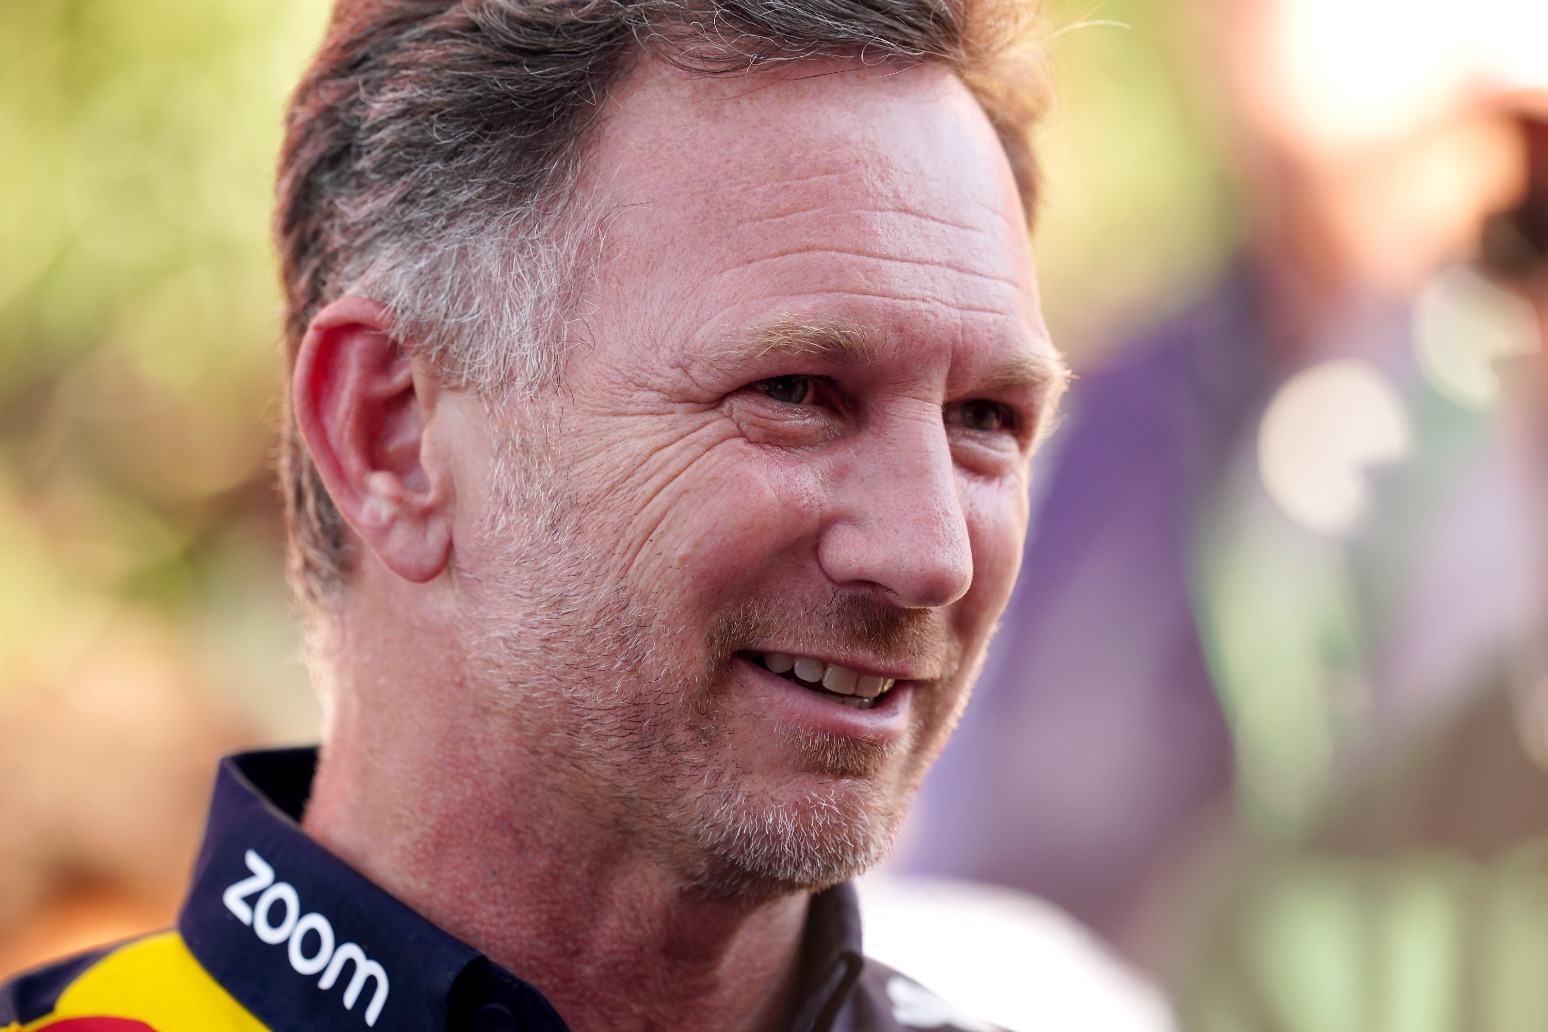 Christian Horner threatens legal action over ‘fictitious claims’ from Toto Wolff 